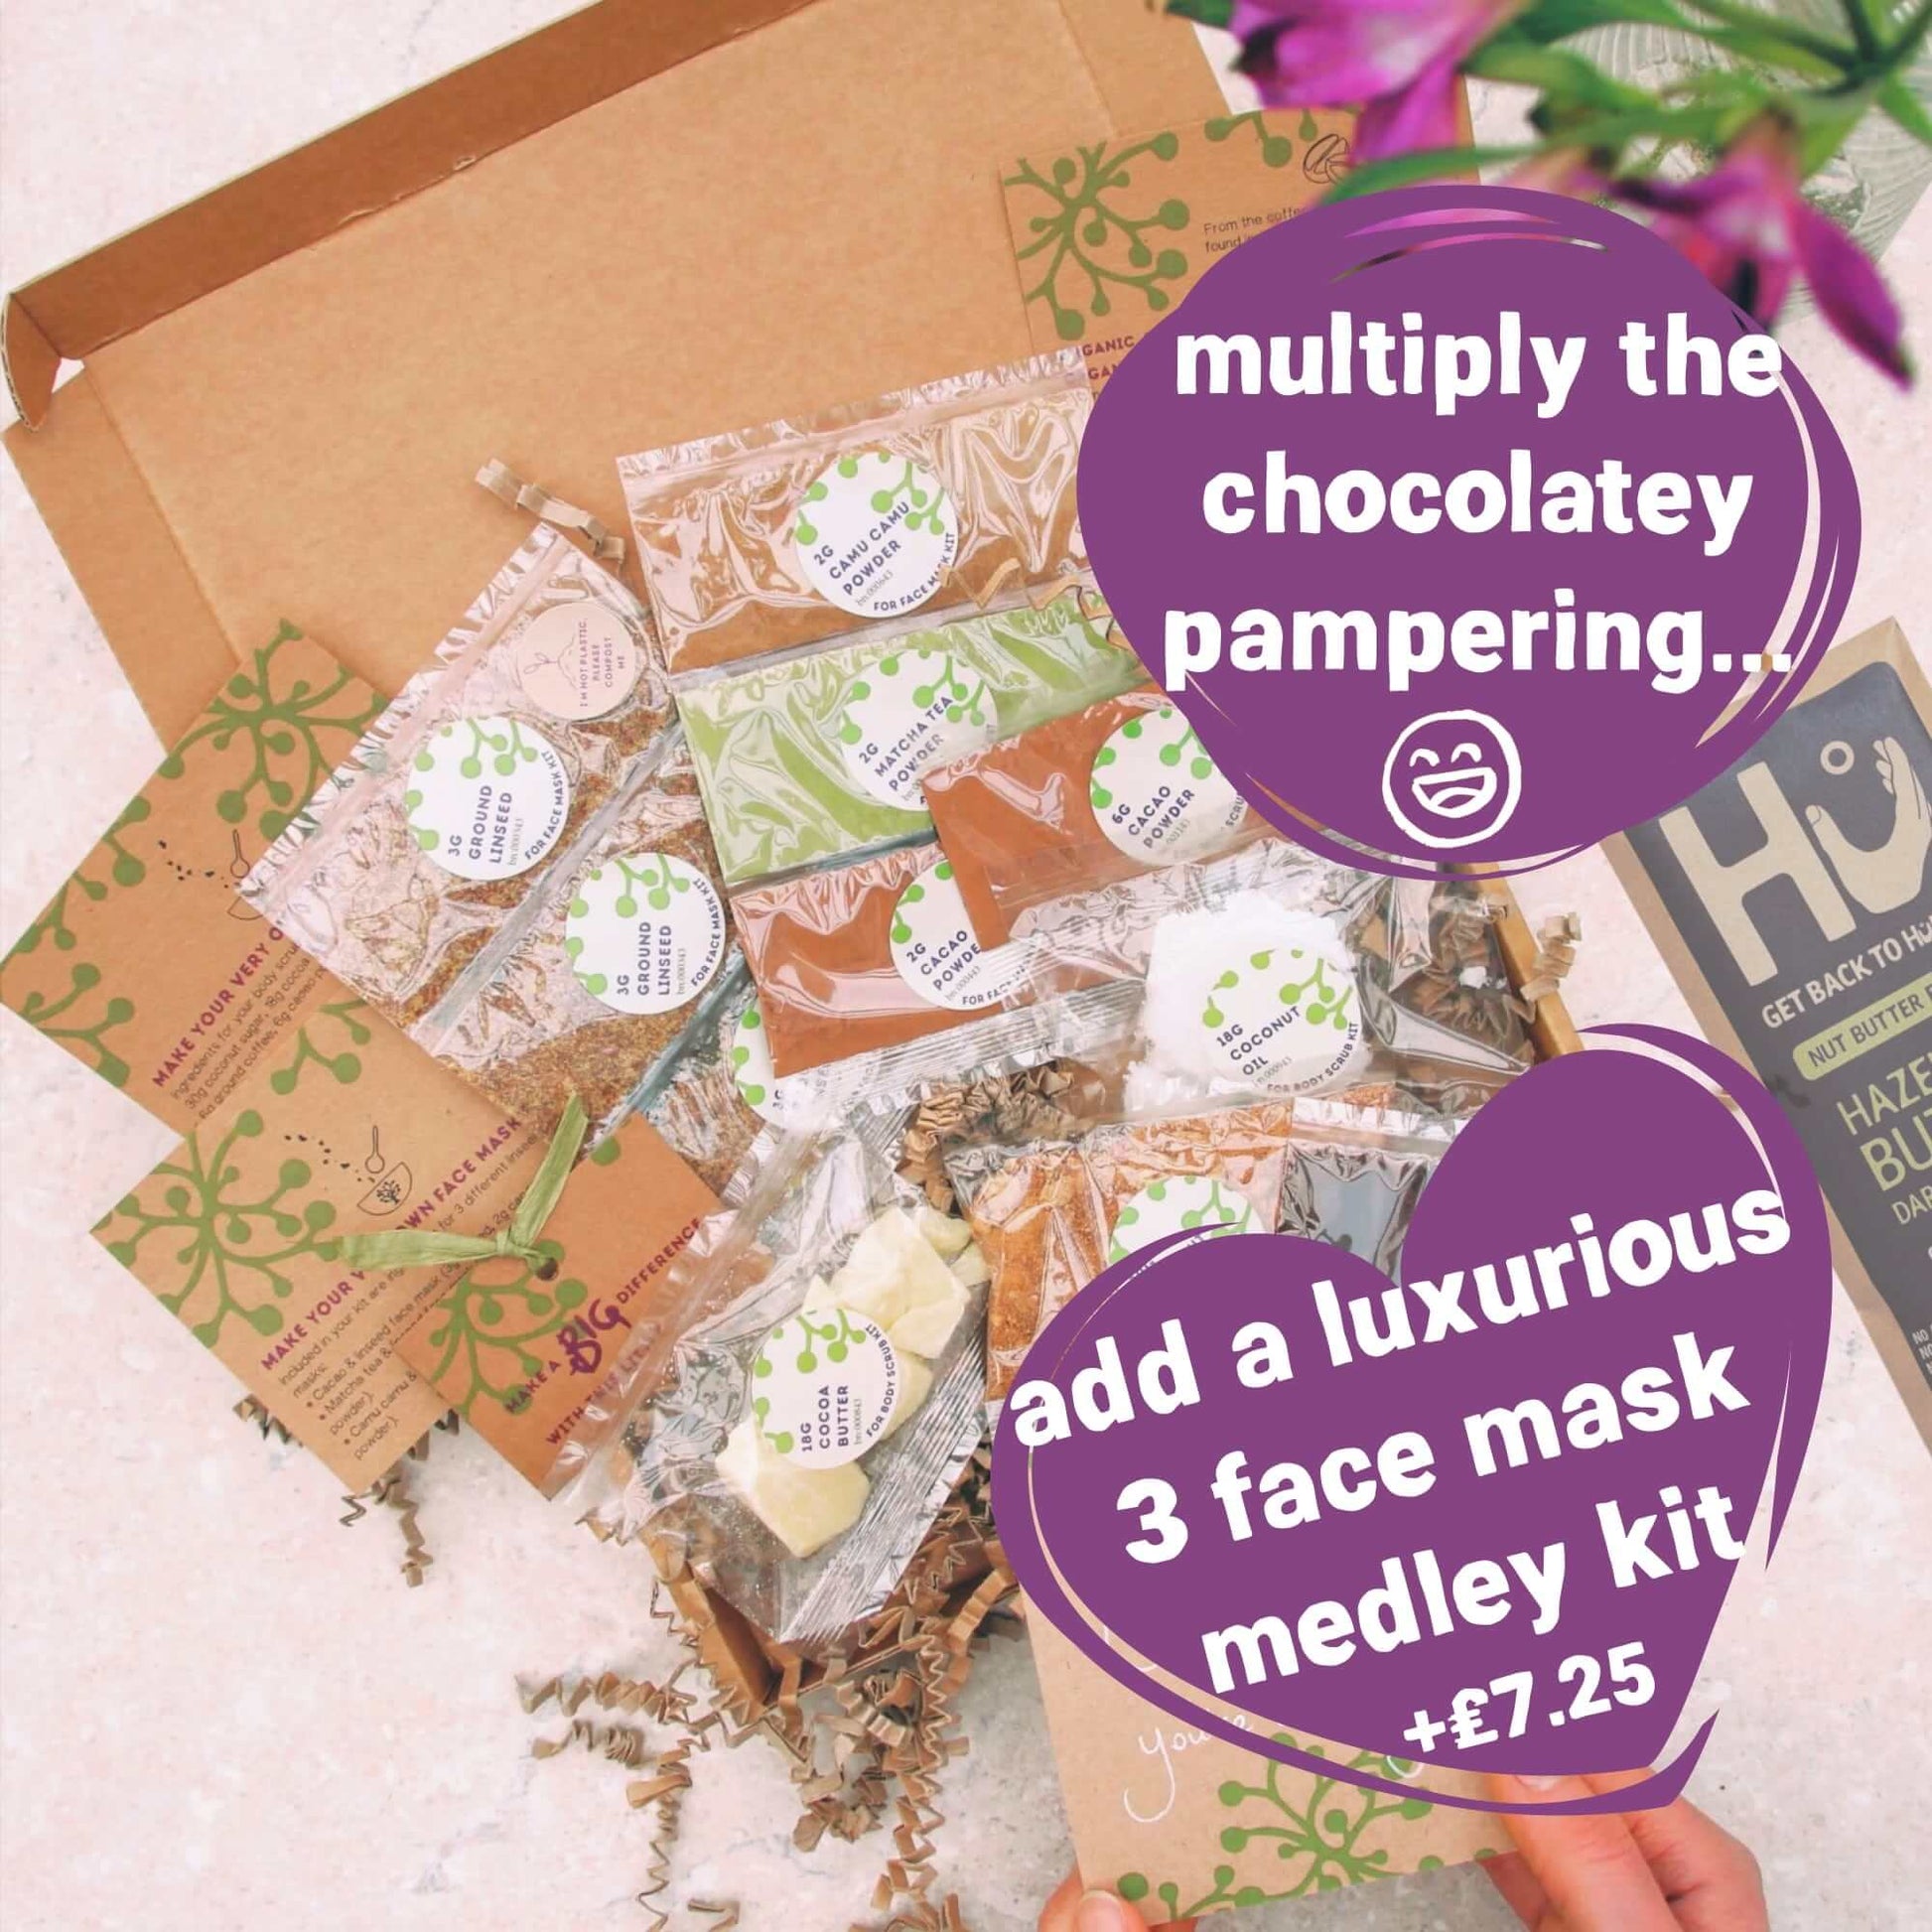 eco-friendly face mask kit inside thank you gift box